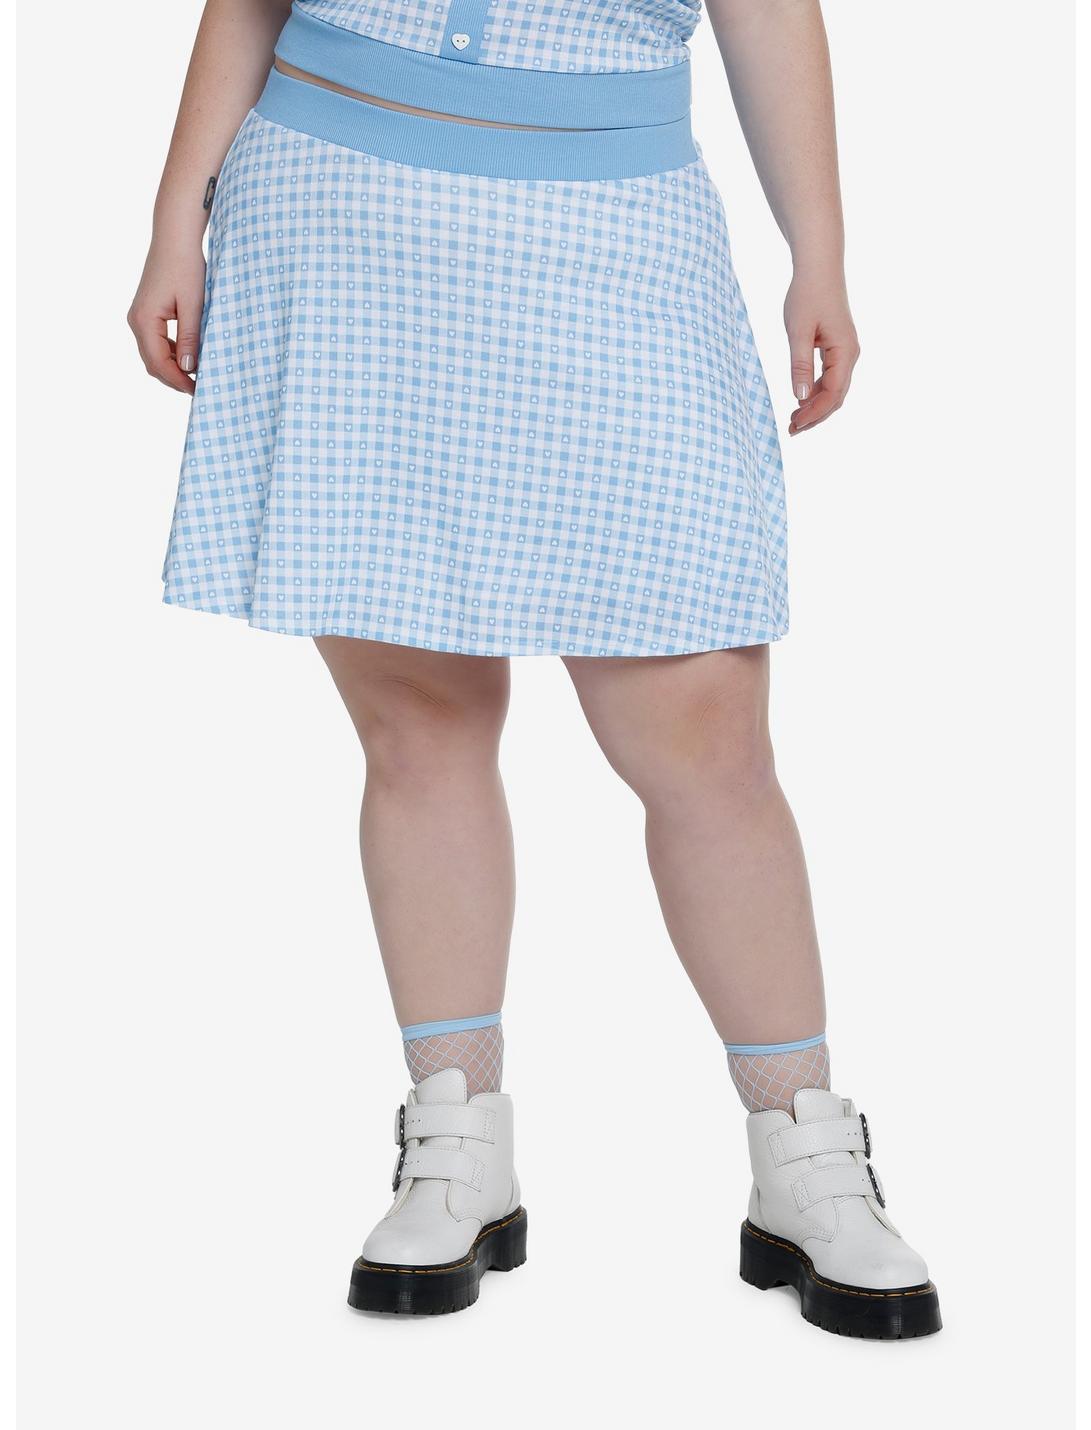 Sweet Society Baby Blue Gingham Girls Sweater Skirt Plus Size, GINGHAM CHECK, hi-res